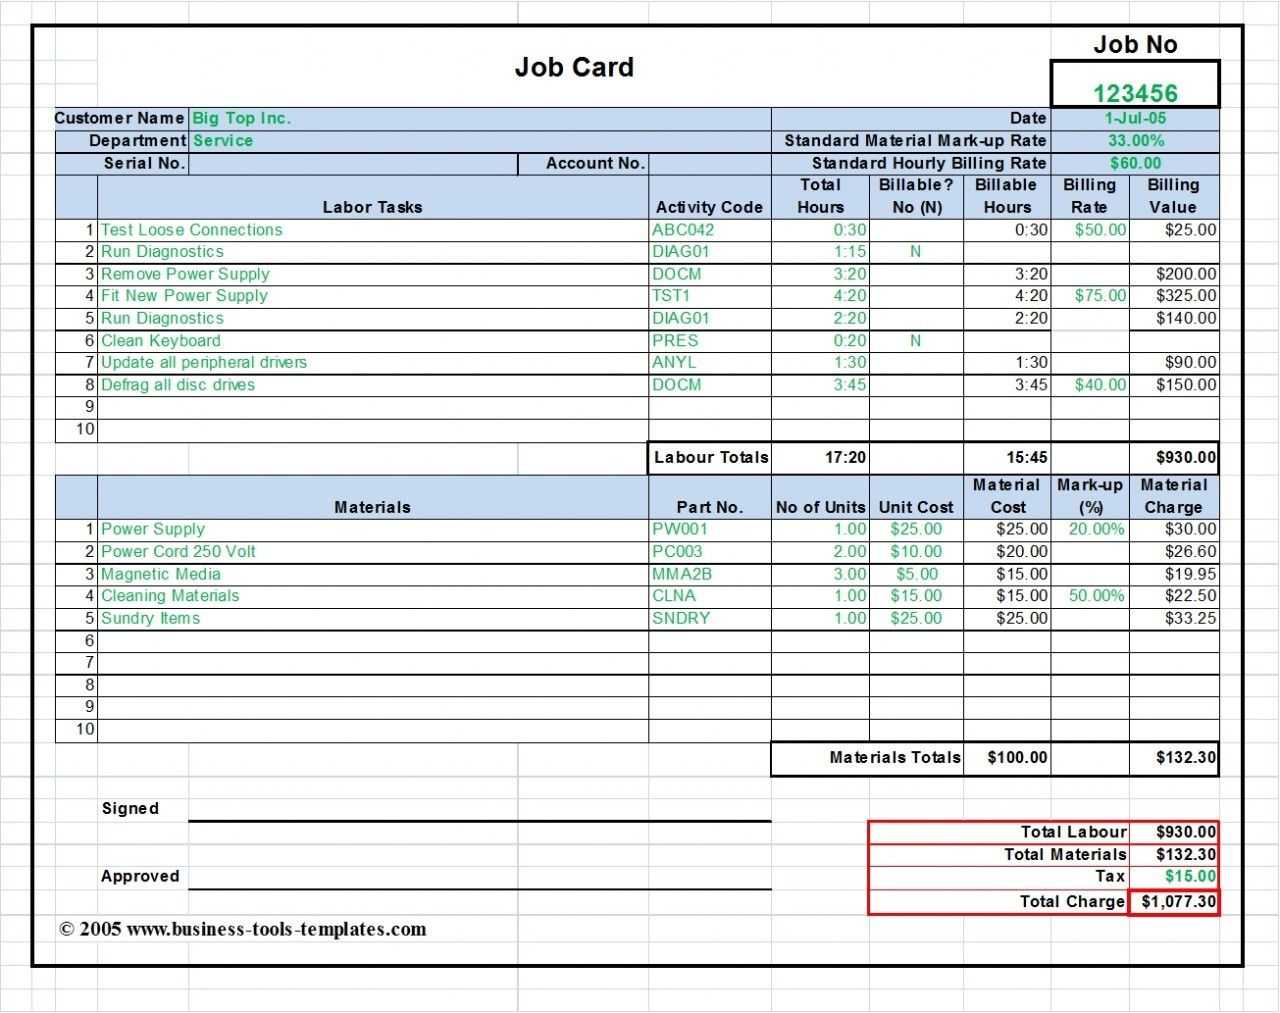 Workshop Job Card Template Excel, Labor & Material Cost With Maintenance Job Card Template